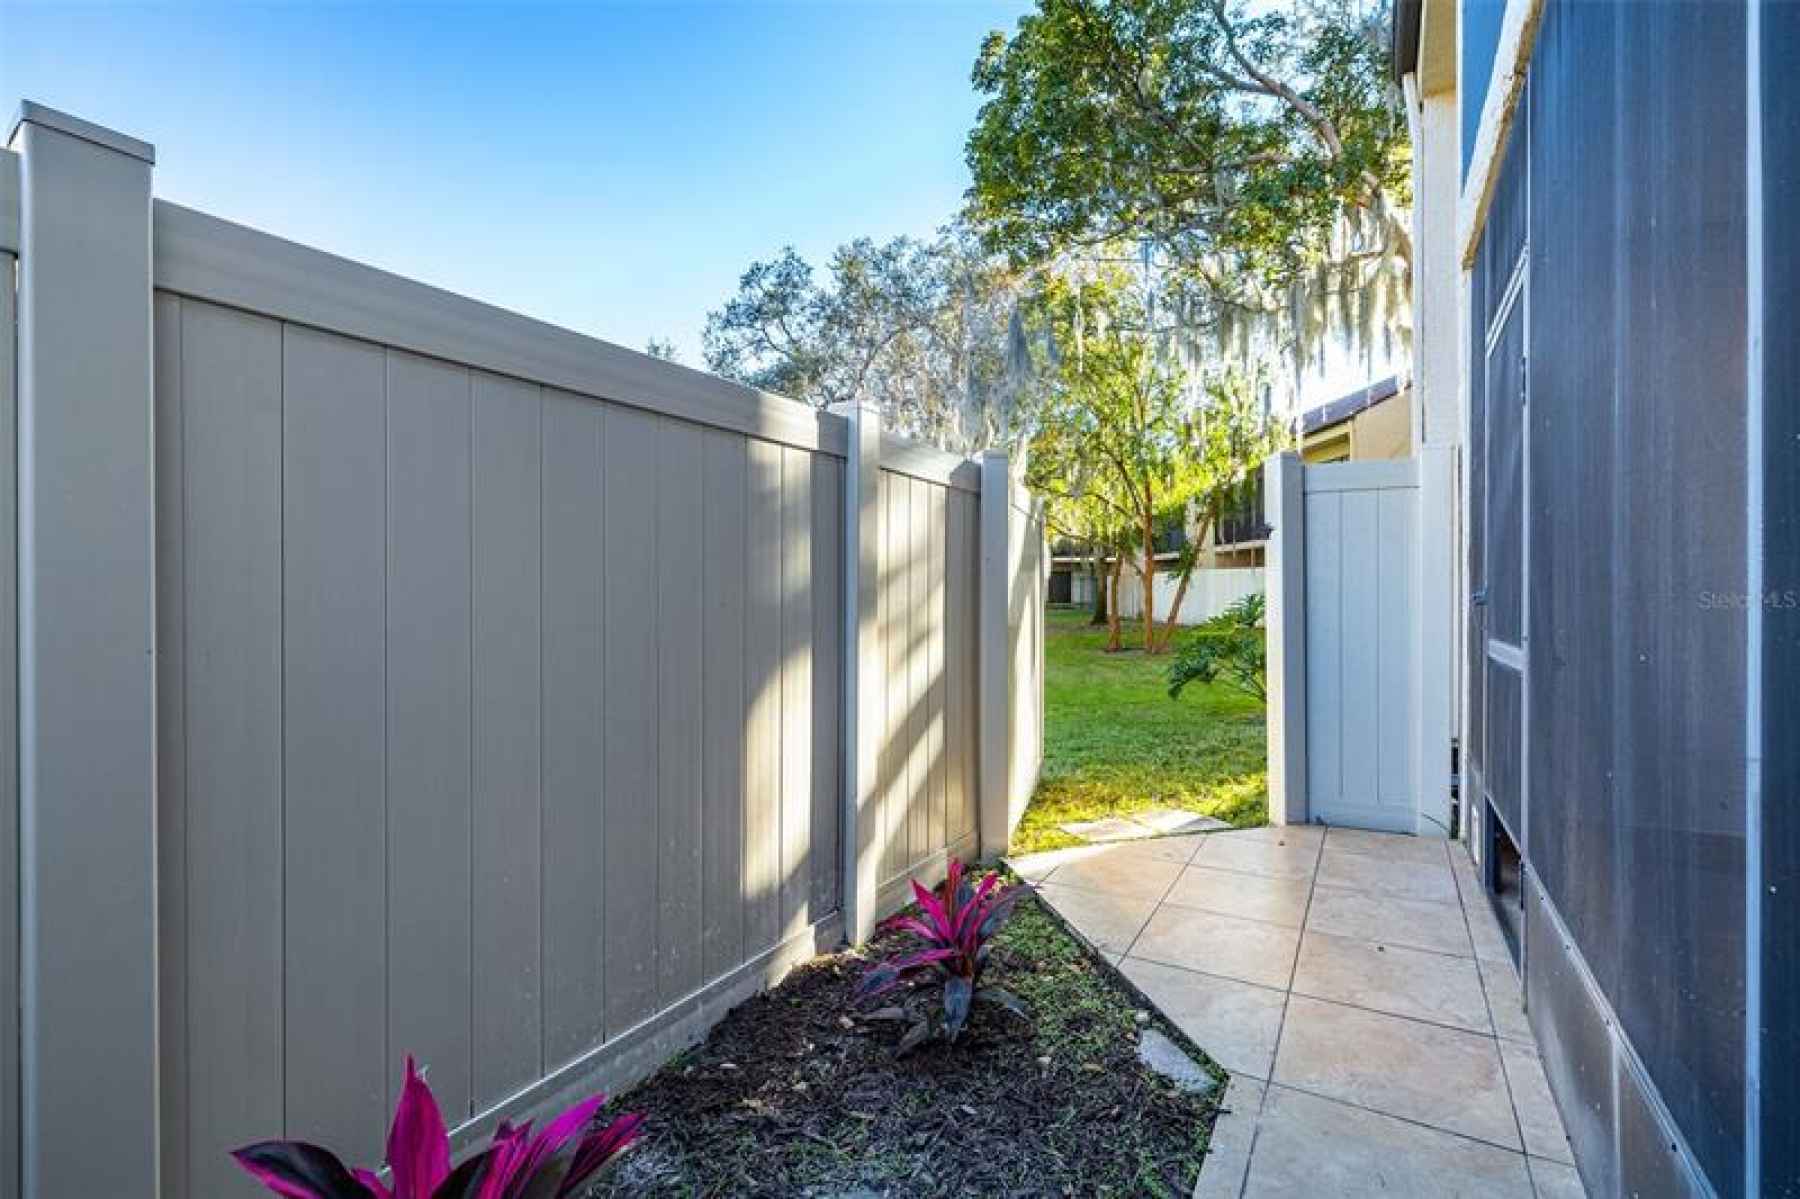 Paved Side Yard with Vinyl Fencing and Gate to Courtyard